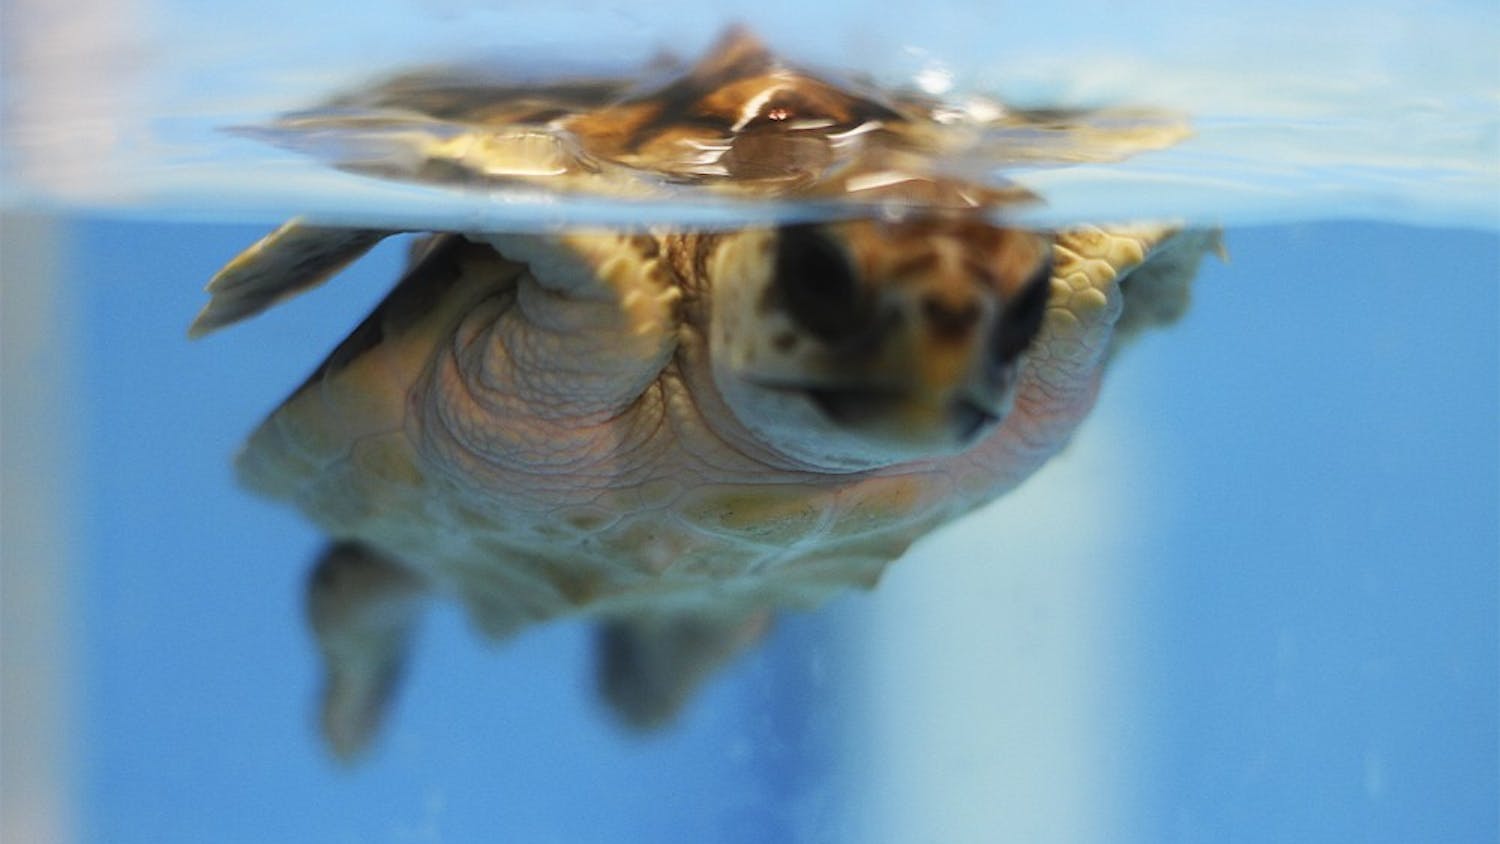 Ken Lohmann has has been studying turtles art UNC for the past 13 years, but he and his wife have been studying them since 1995. "Sea turtles aren't for everyone, but I never get sick of them," he said.